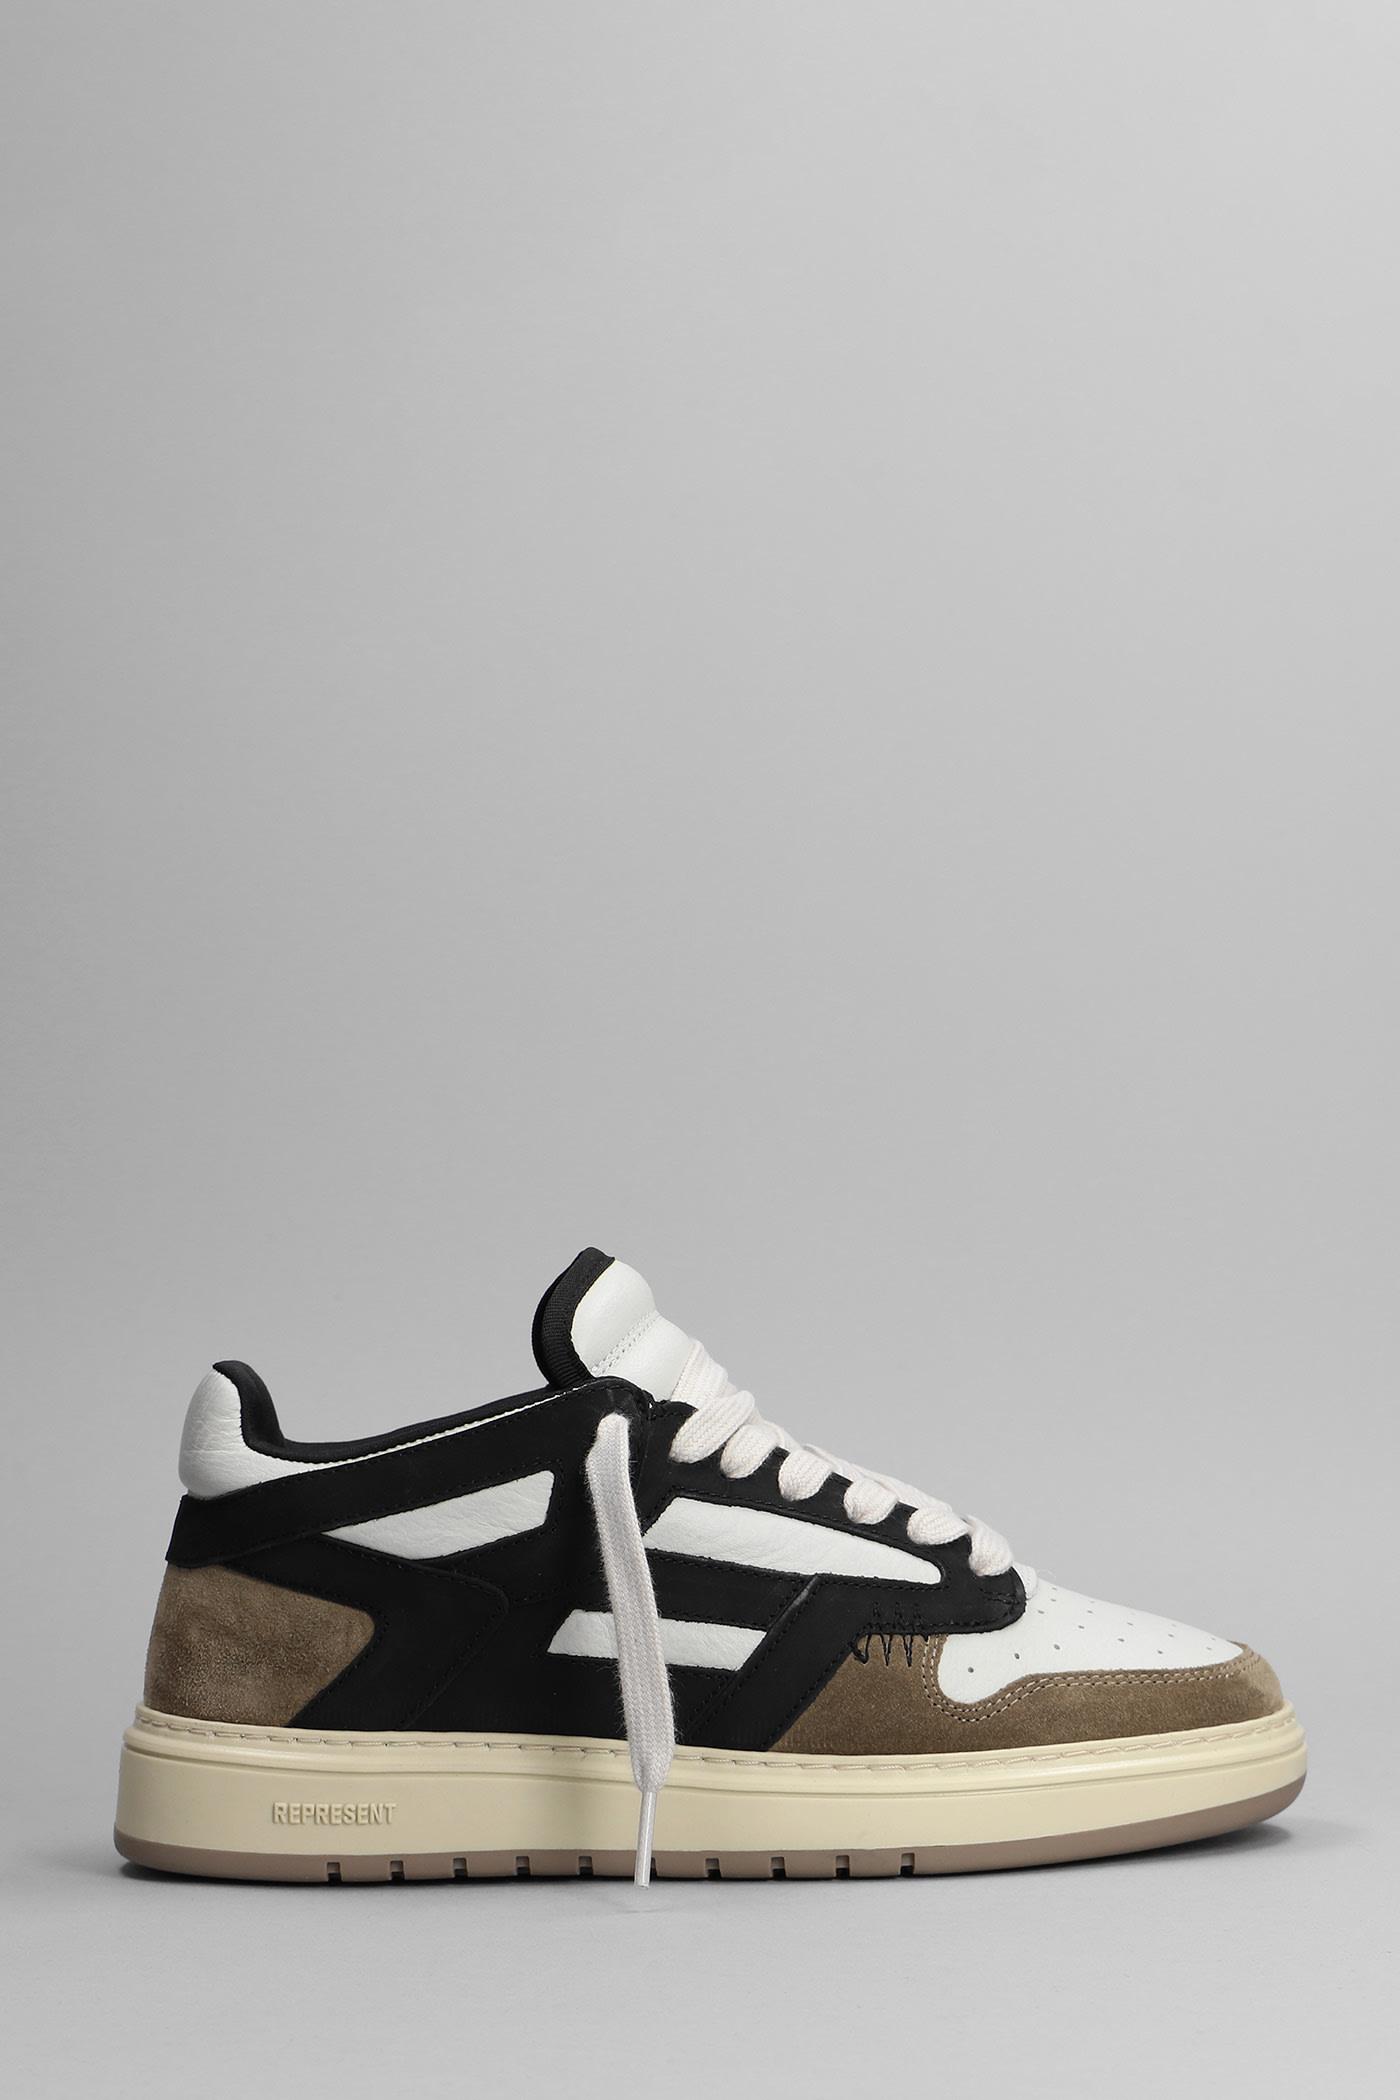 Represent Reptor Low Sneakers In Brown Suede And Leather in Gray for